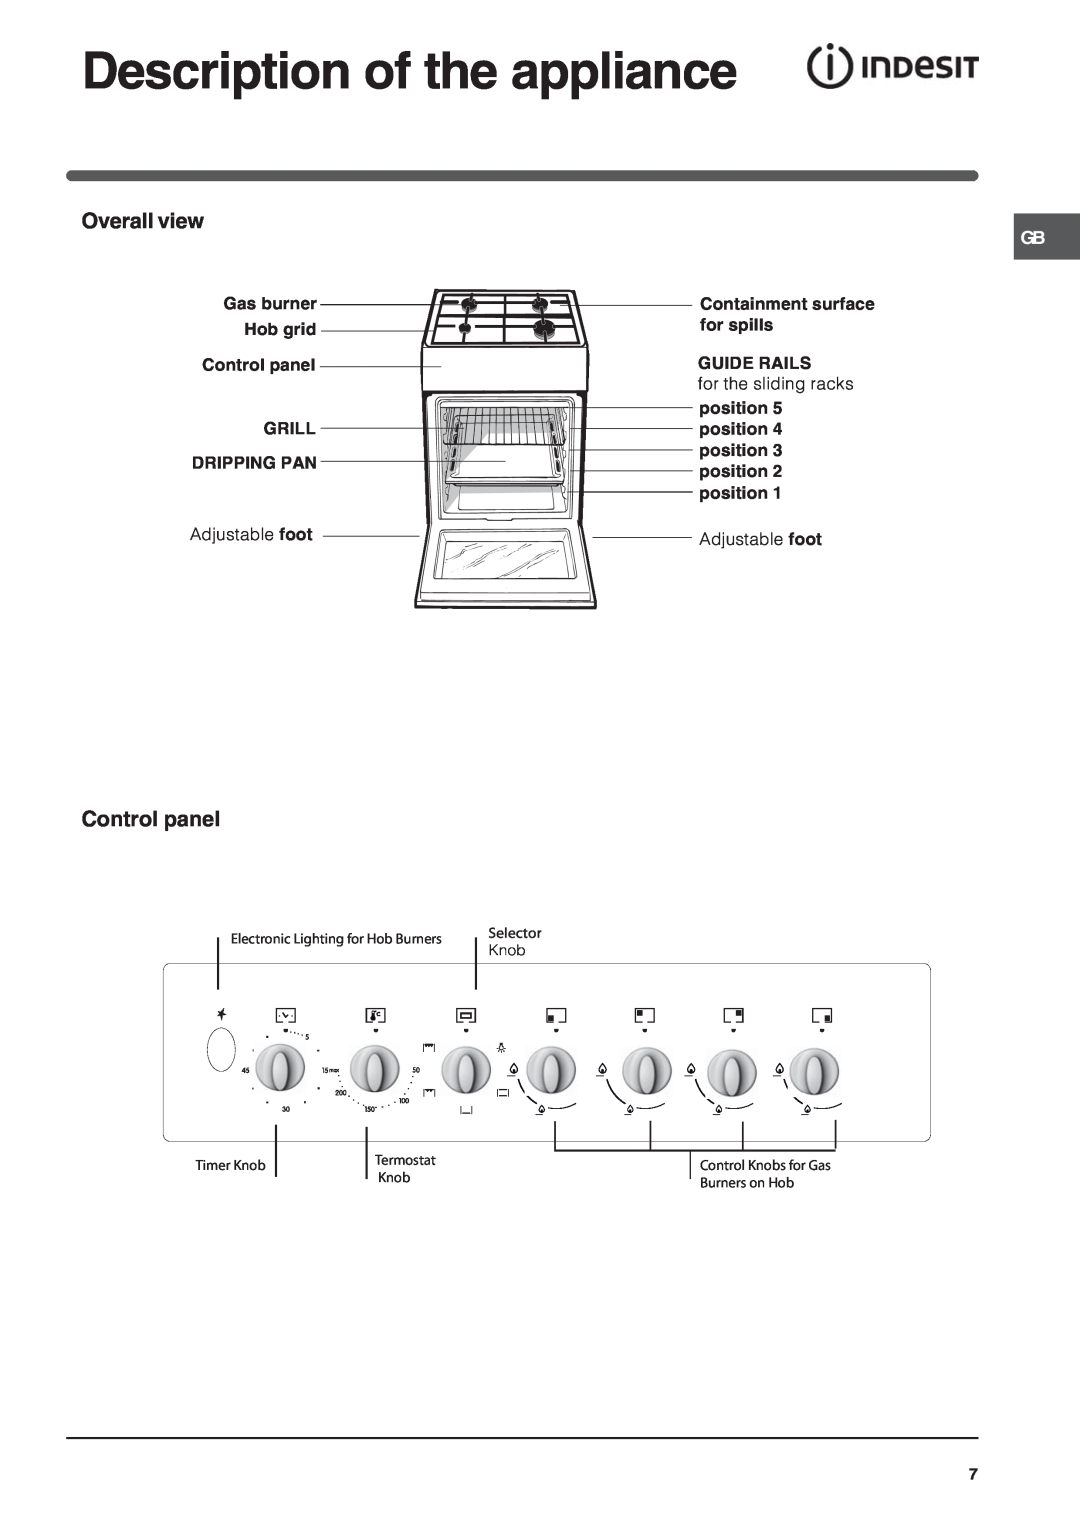 Indesit IS50D1 Description of the appliance, Overall view, Gas burner Hob grid Control panel GRILL, Dripping Pan 